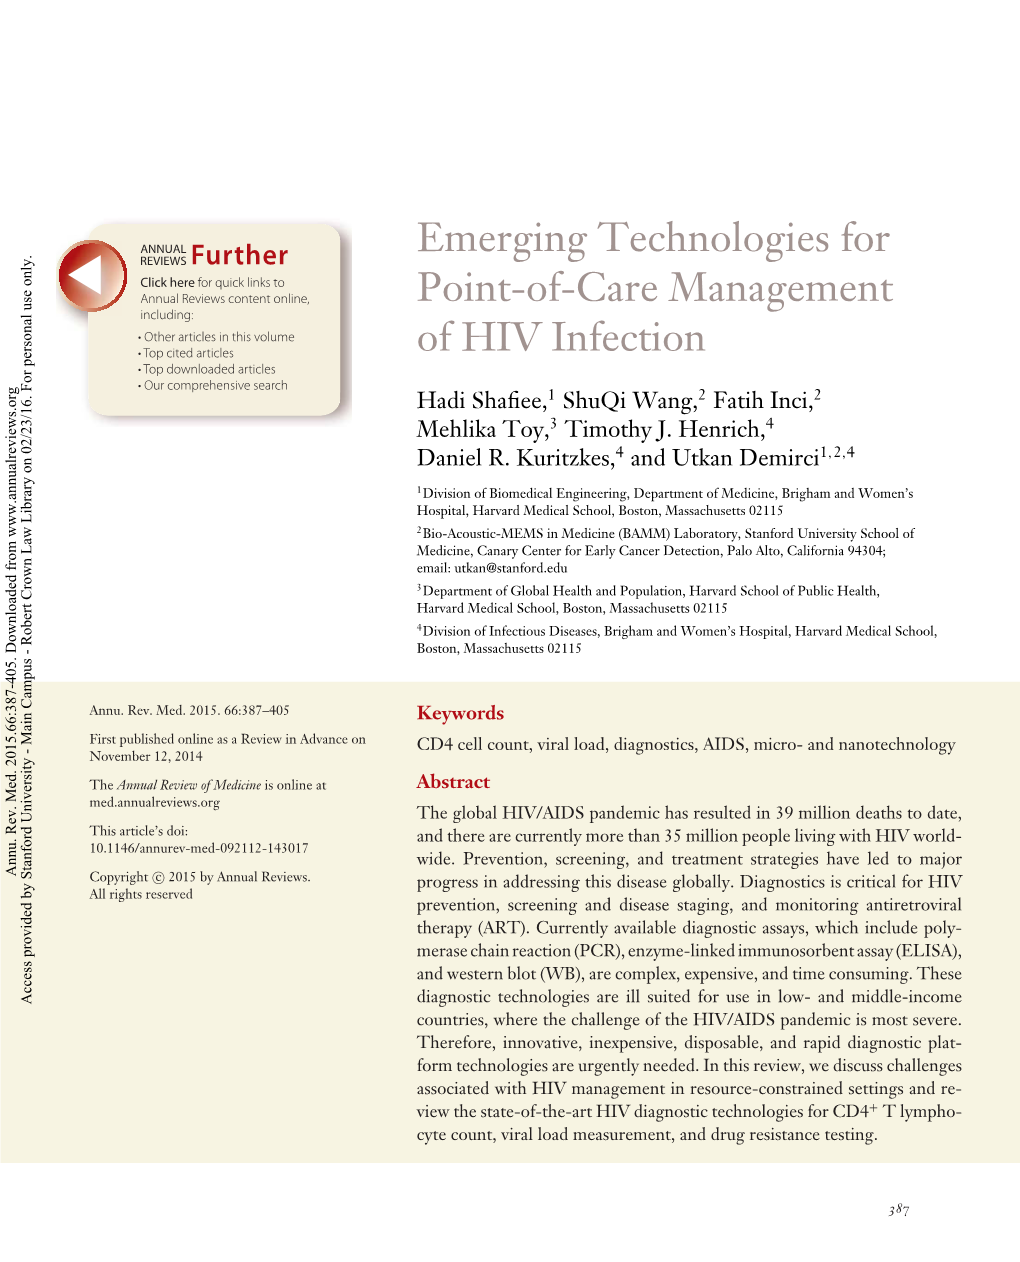 Emerging Technologies for Point-Of-Care Management of HIV Infection